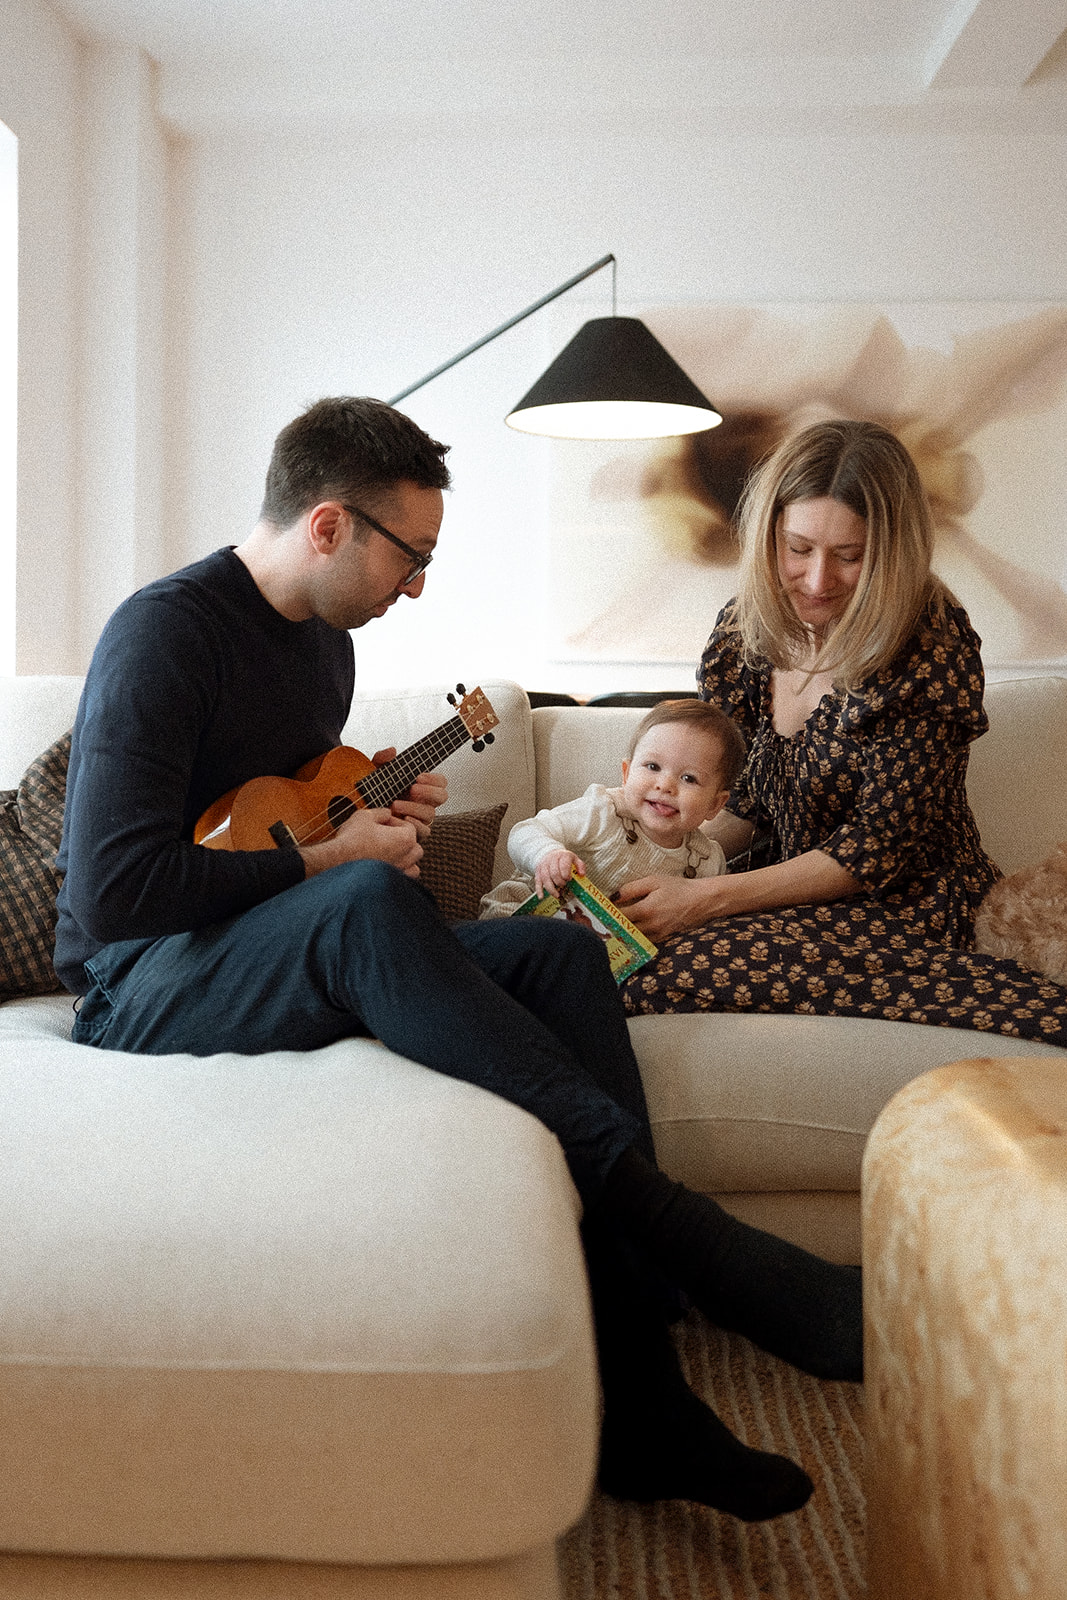 A family photography session at home to celebrate their daughters first birthday